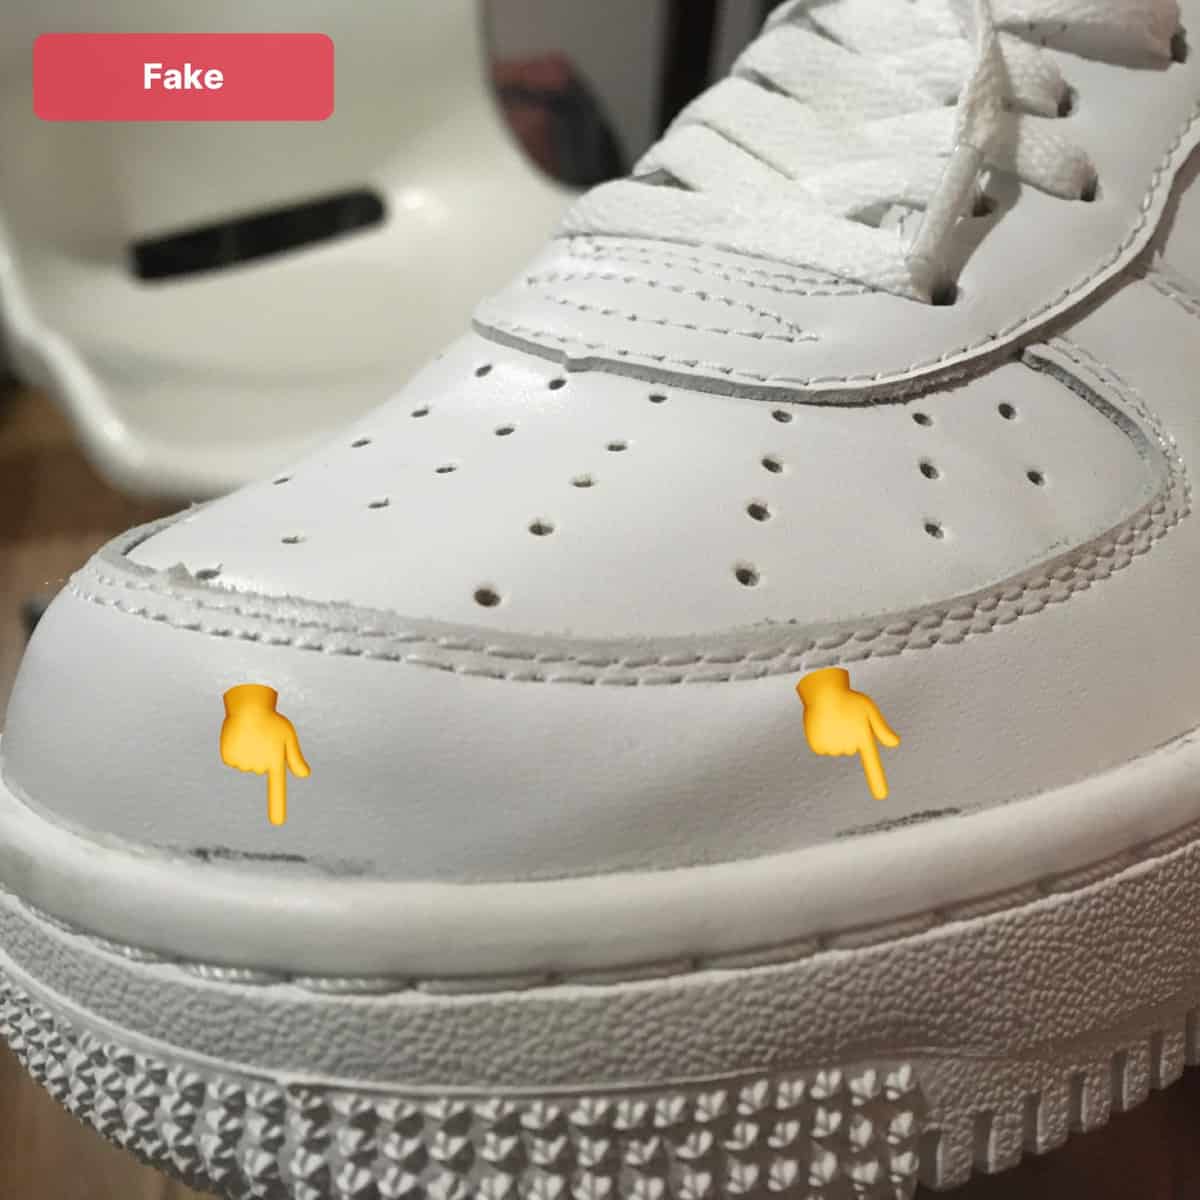 Weird AF1 questionAny idea as to why one shoe tongue higher than the  other on identical pair of Air Force ones?? : r/Sneakers